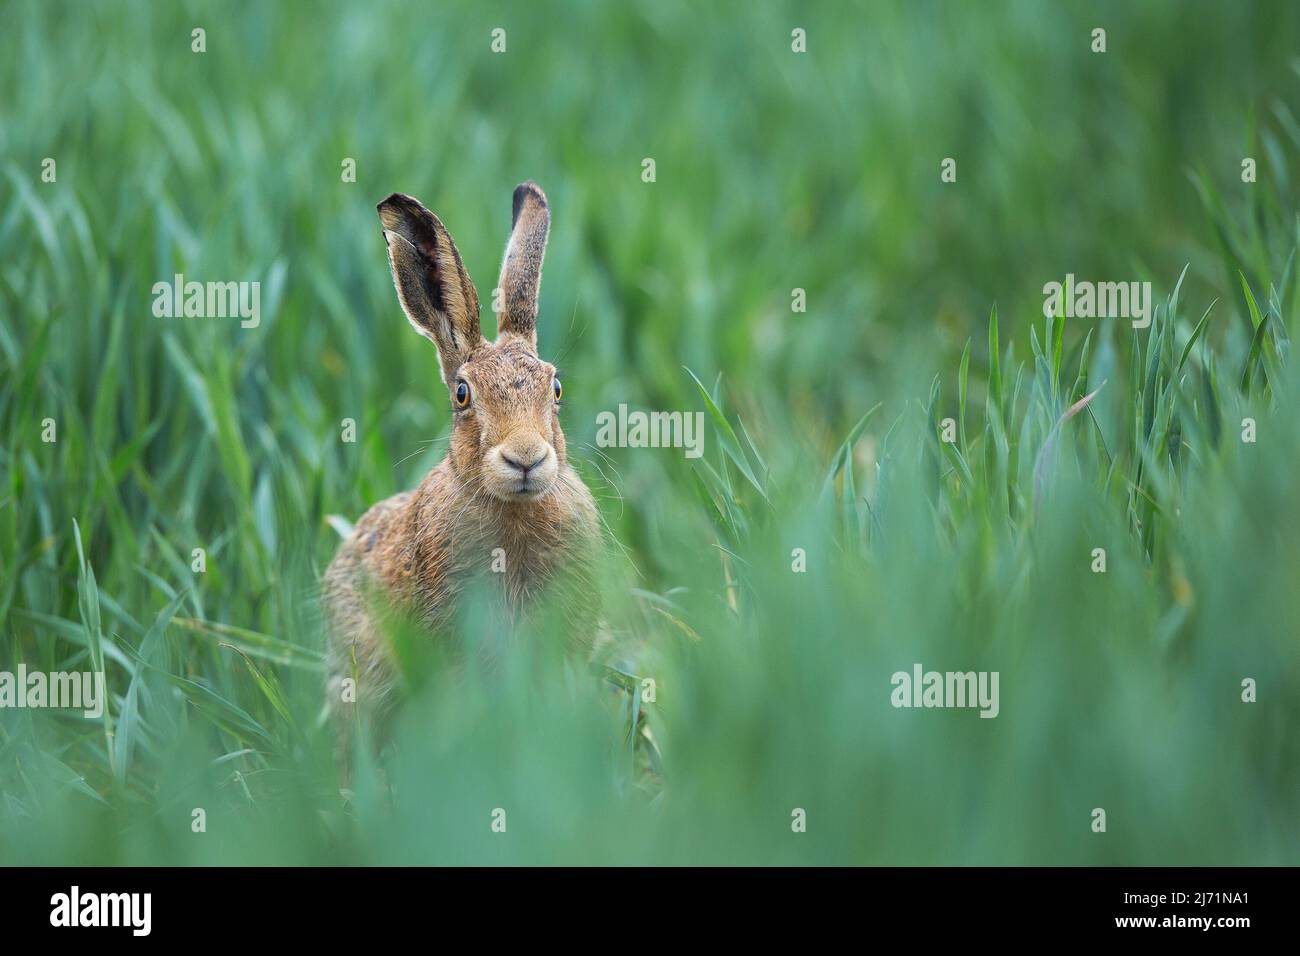 Front view of a wild European brown hare (Lepus europaeus) on alert with ears pricked up in long grass. Stock Photo